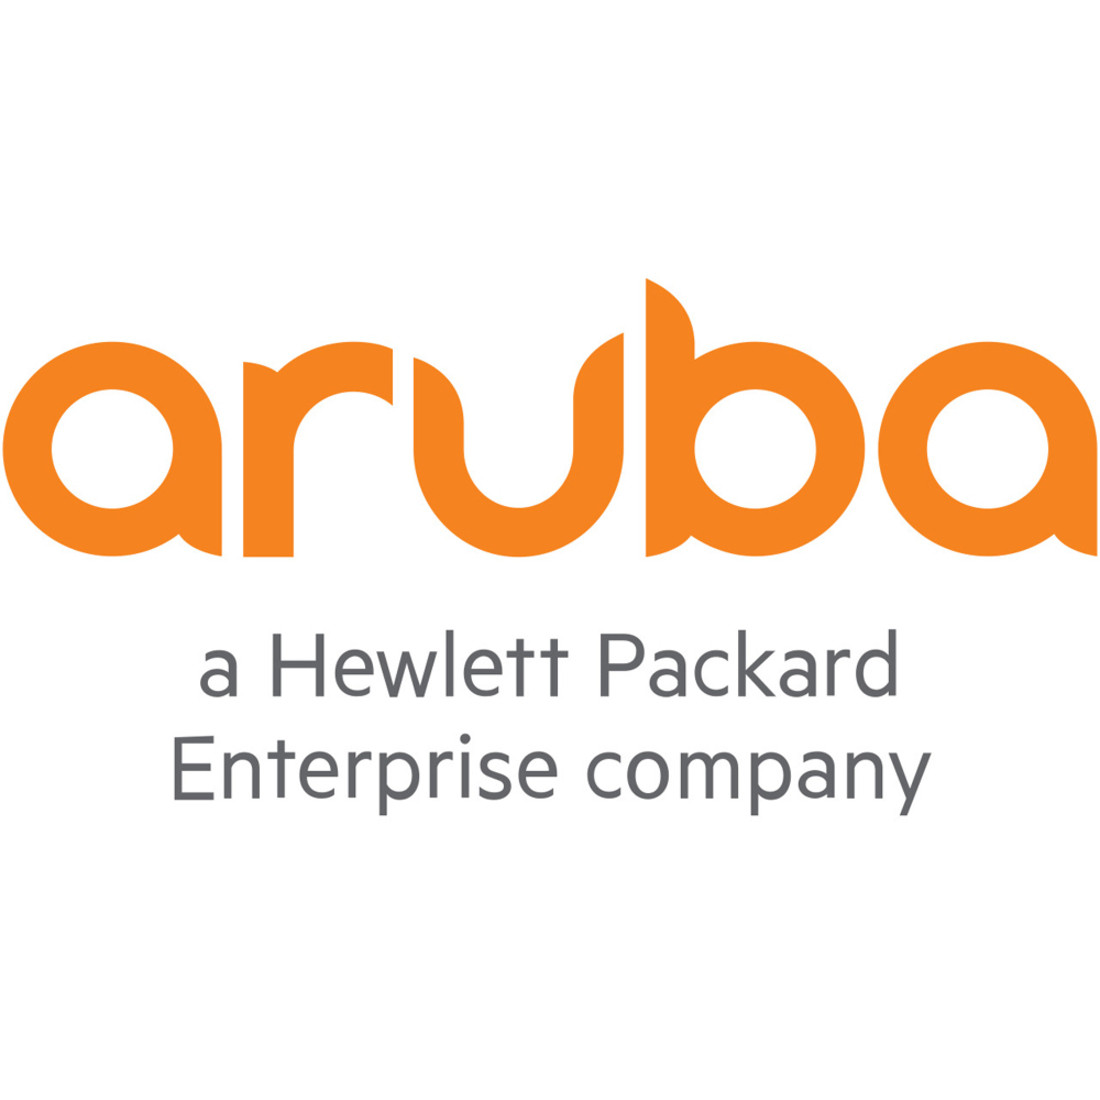 Aruba ClearPass Device Insight New LicensingSubscription License100 DeviceElectronic R0Z66AAE